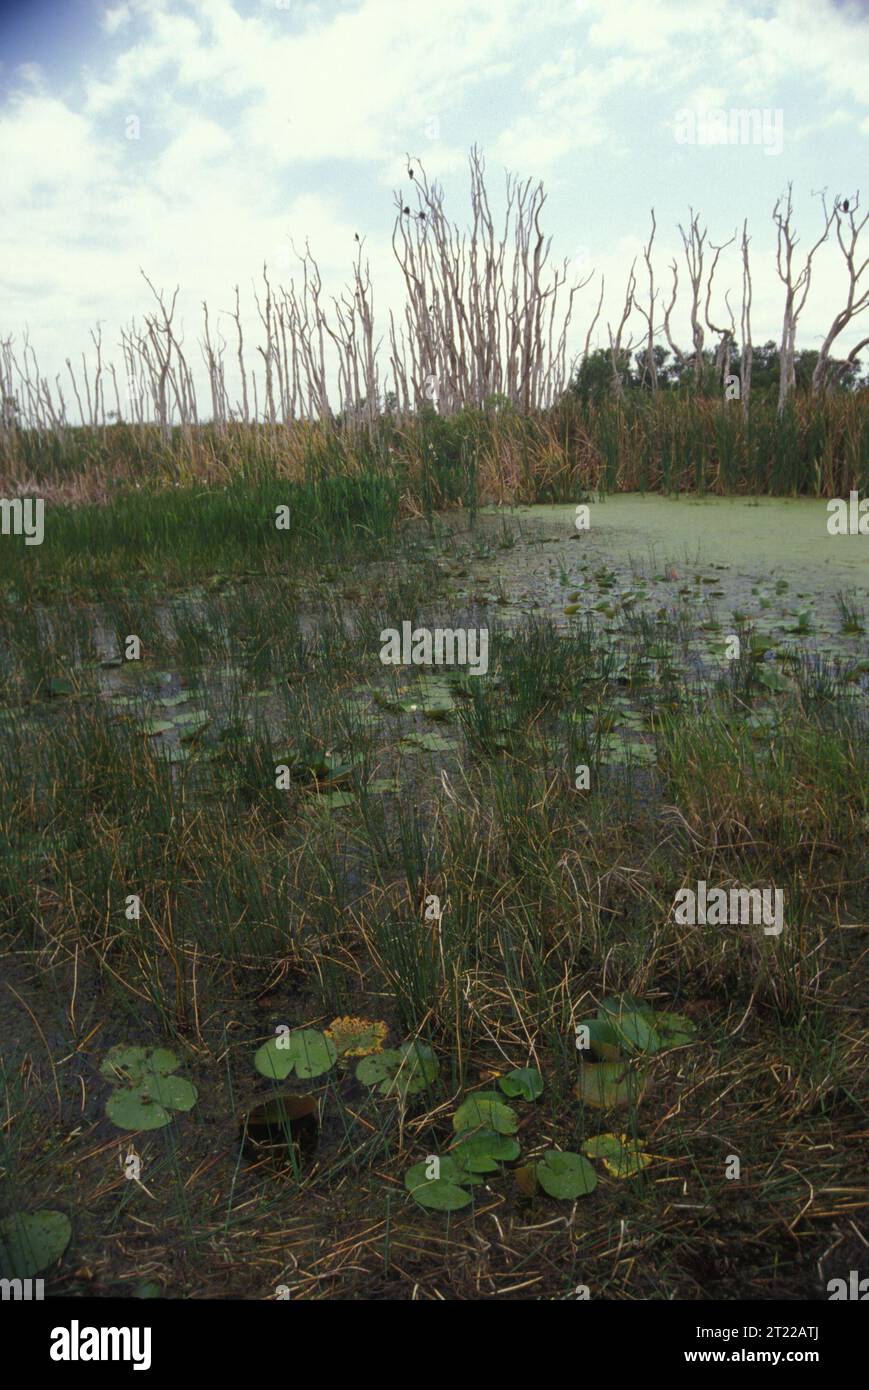 Grasses, trees, and aquatic plants in a wetlands. Subjects: Wetlands; Vegetation; Aquatic plants. Location: Florida. Fish and Wildlife Service Site: LOXAHATCHEE NATIONAL WILDLIFE REFUGE.  . 1998 - 2011. Stock Photo